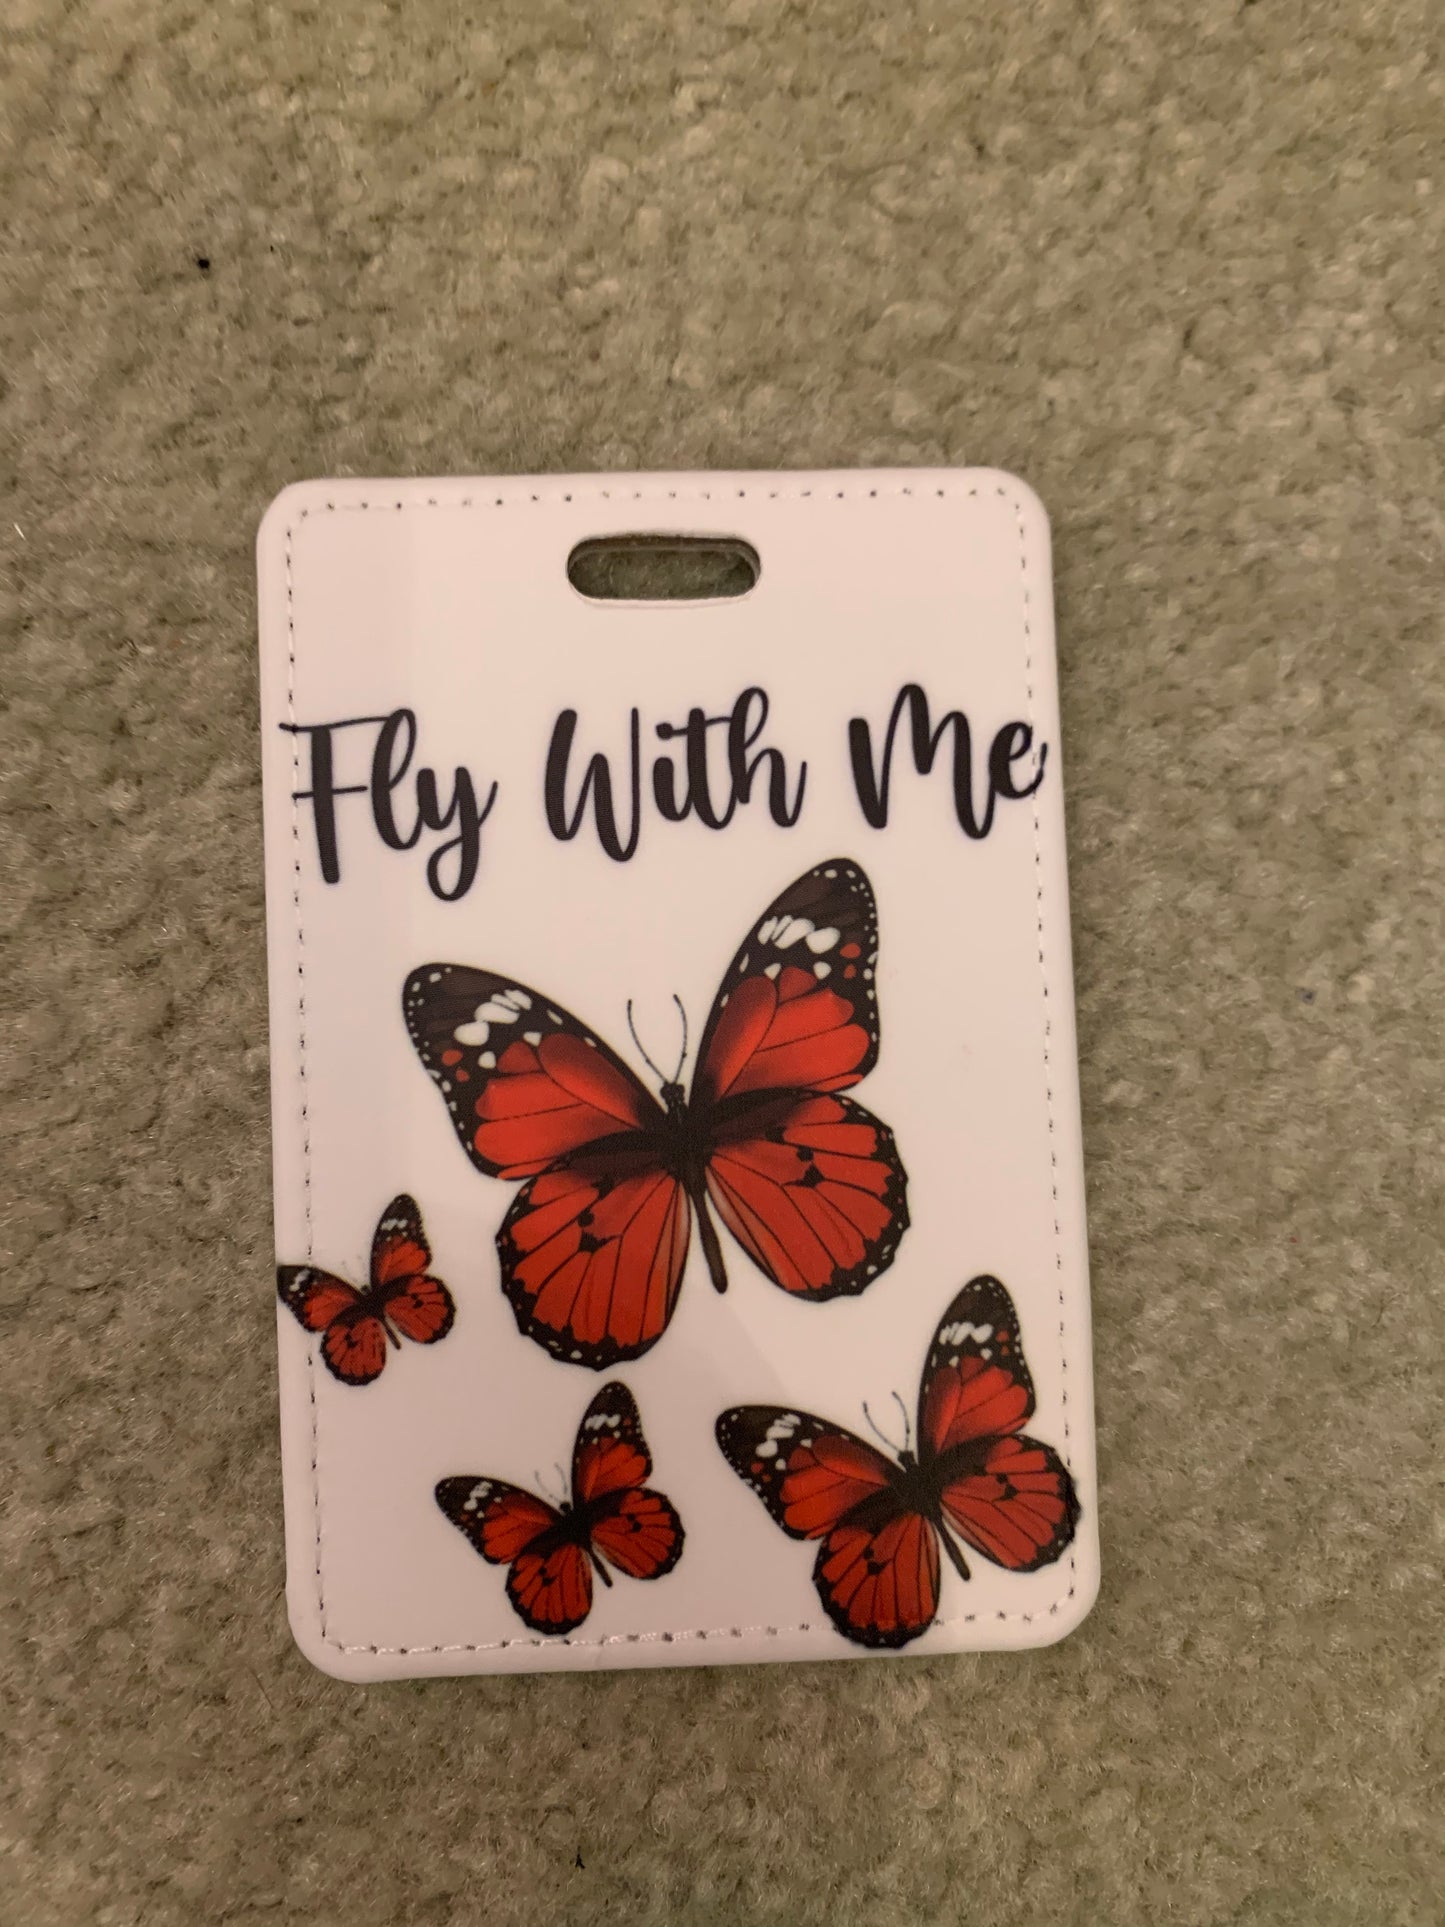 Custom Unique Luggage Tag, Double Sided, Durable, Stand Out In The Crowd